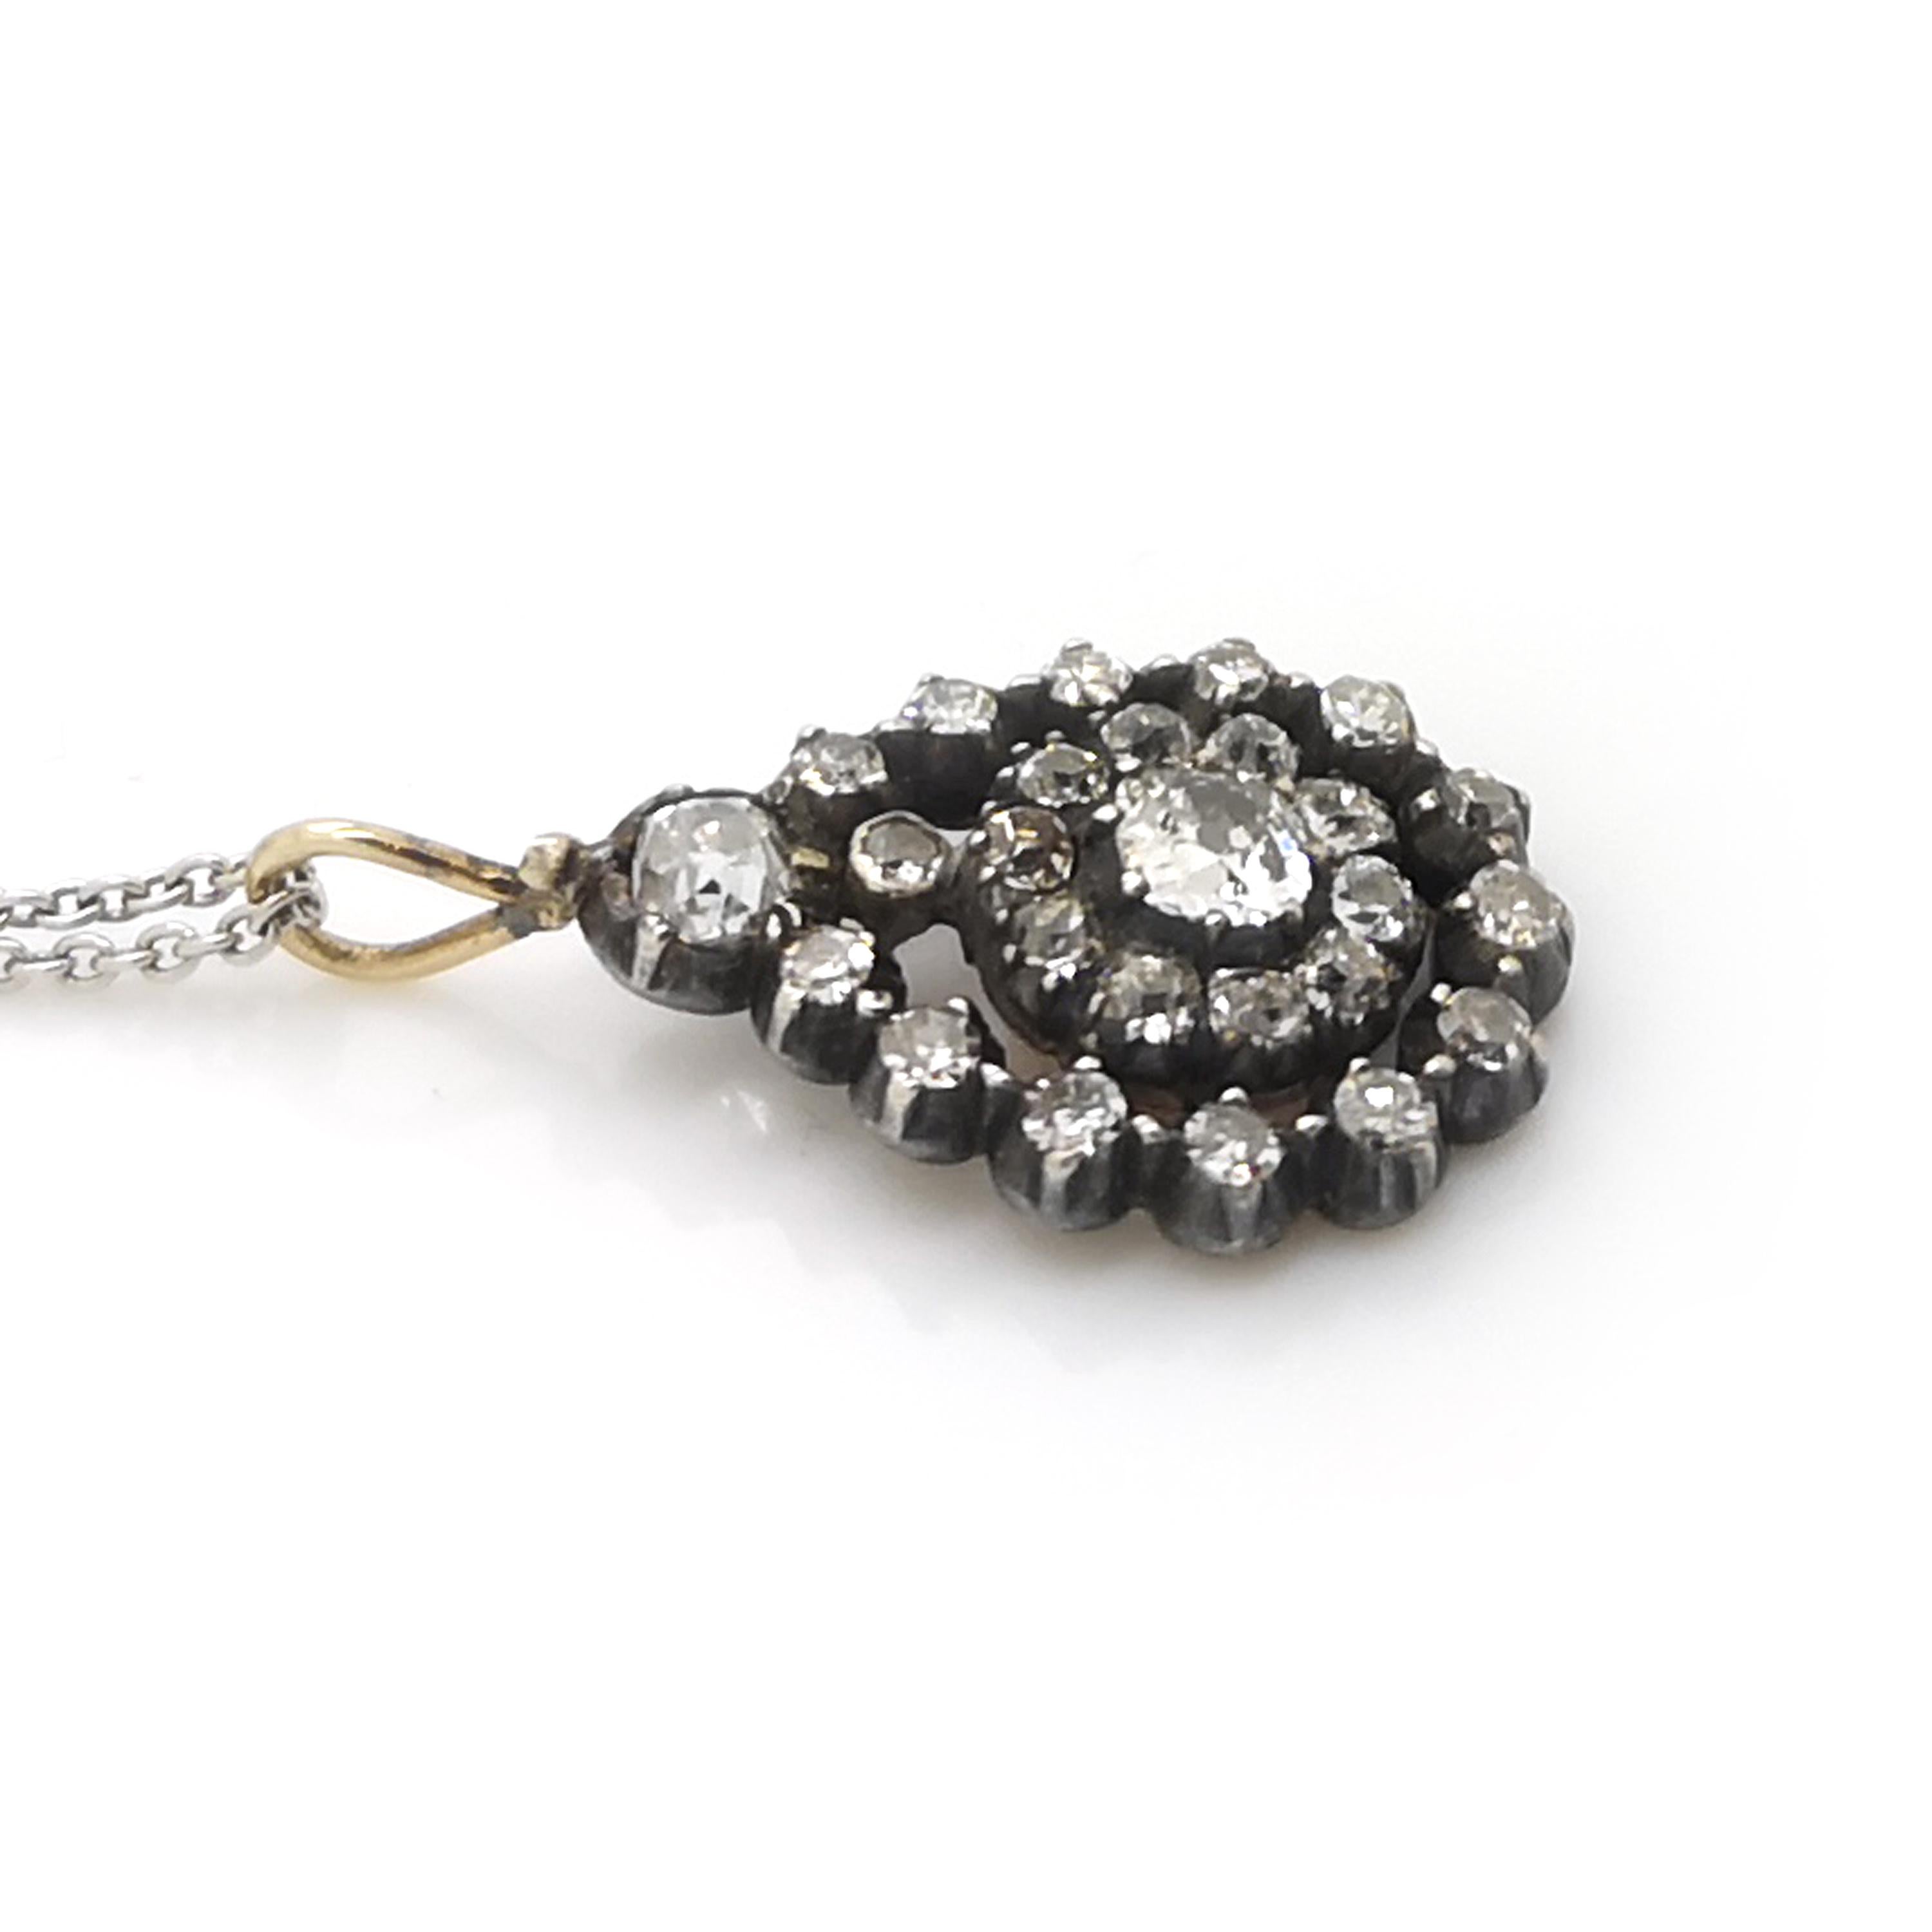 A Victorian diamond drop pendant, with an old-cut, diamond set, open pear shape loop, with a central diamond cluster suspended in the centre, set with old-cut diamonds, in cut down settings, mounted in silver-upon-gold, circa 1880, on a modern